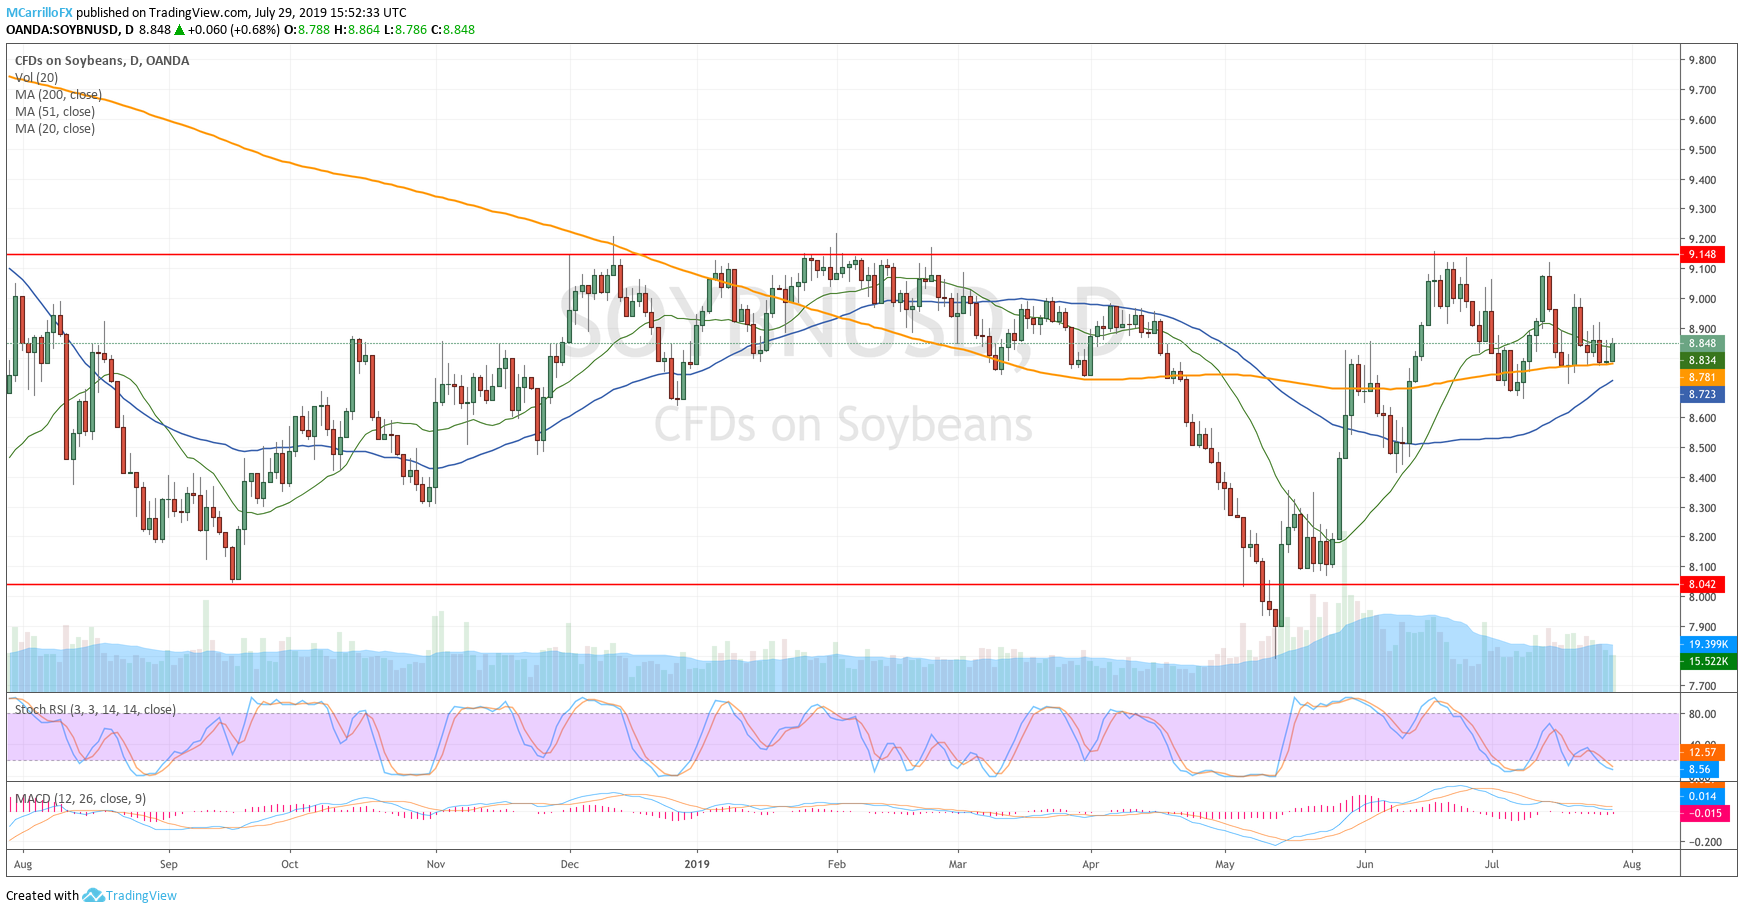 Prices of Soybean daily chart July 29